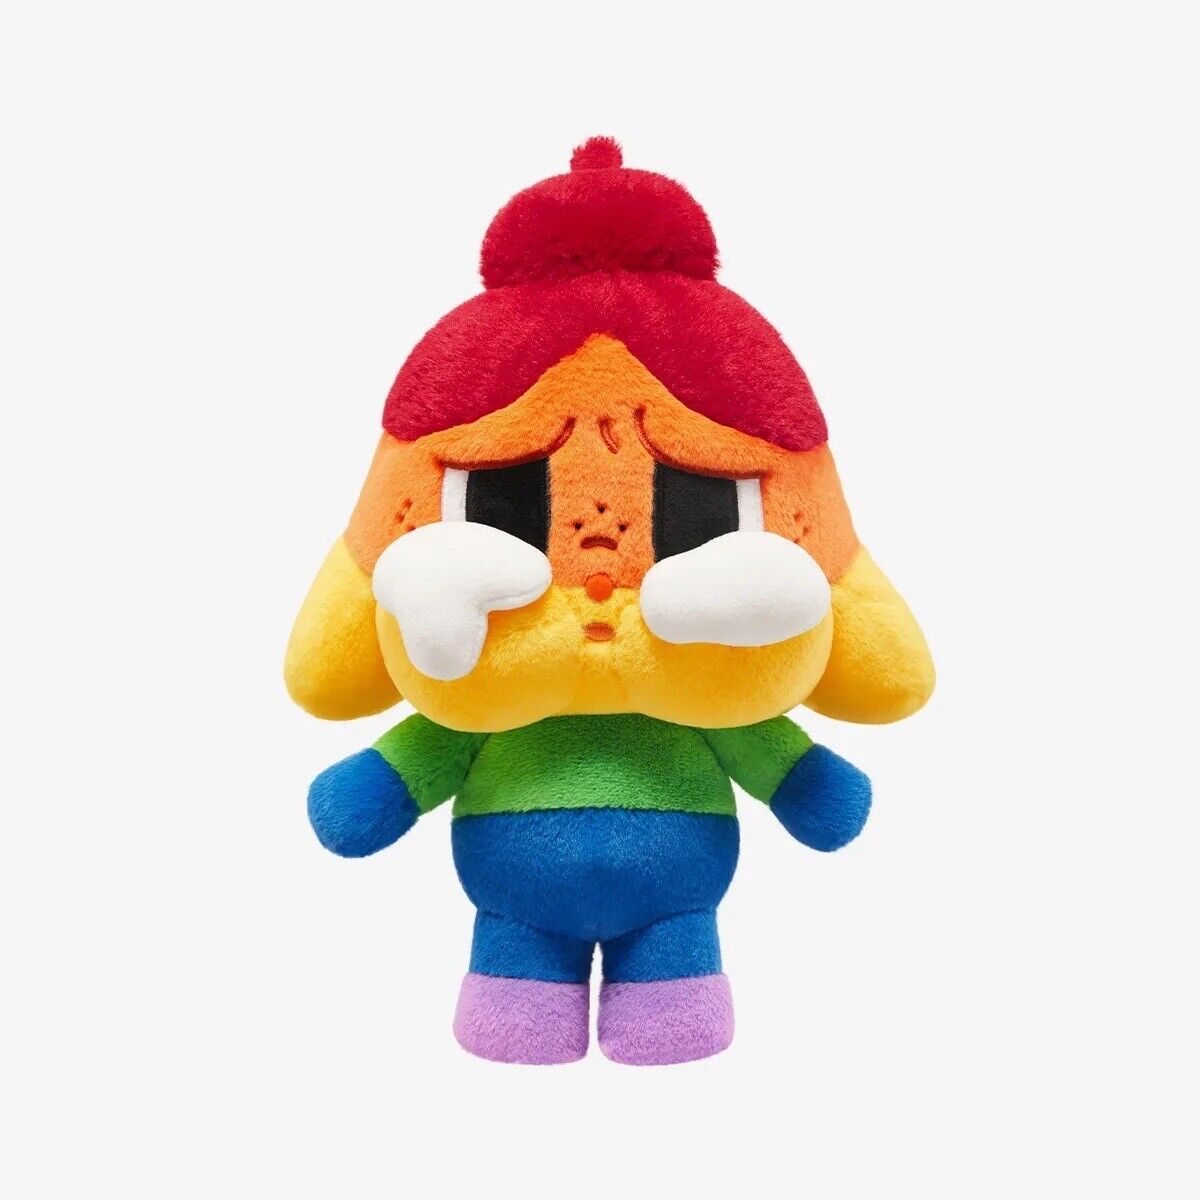 POPMART CRYBABY CHEER UP, BABY SERIES-Plush Doll From Official Shop NYC